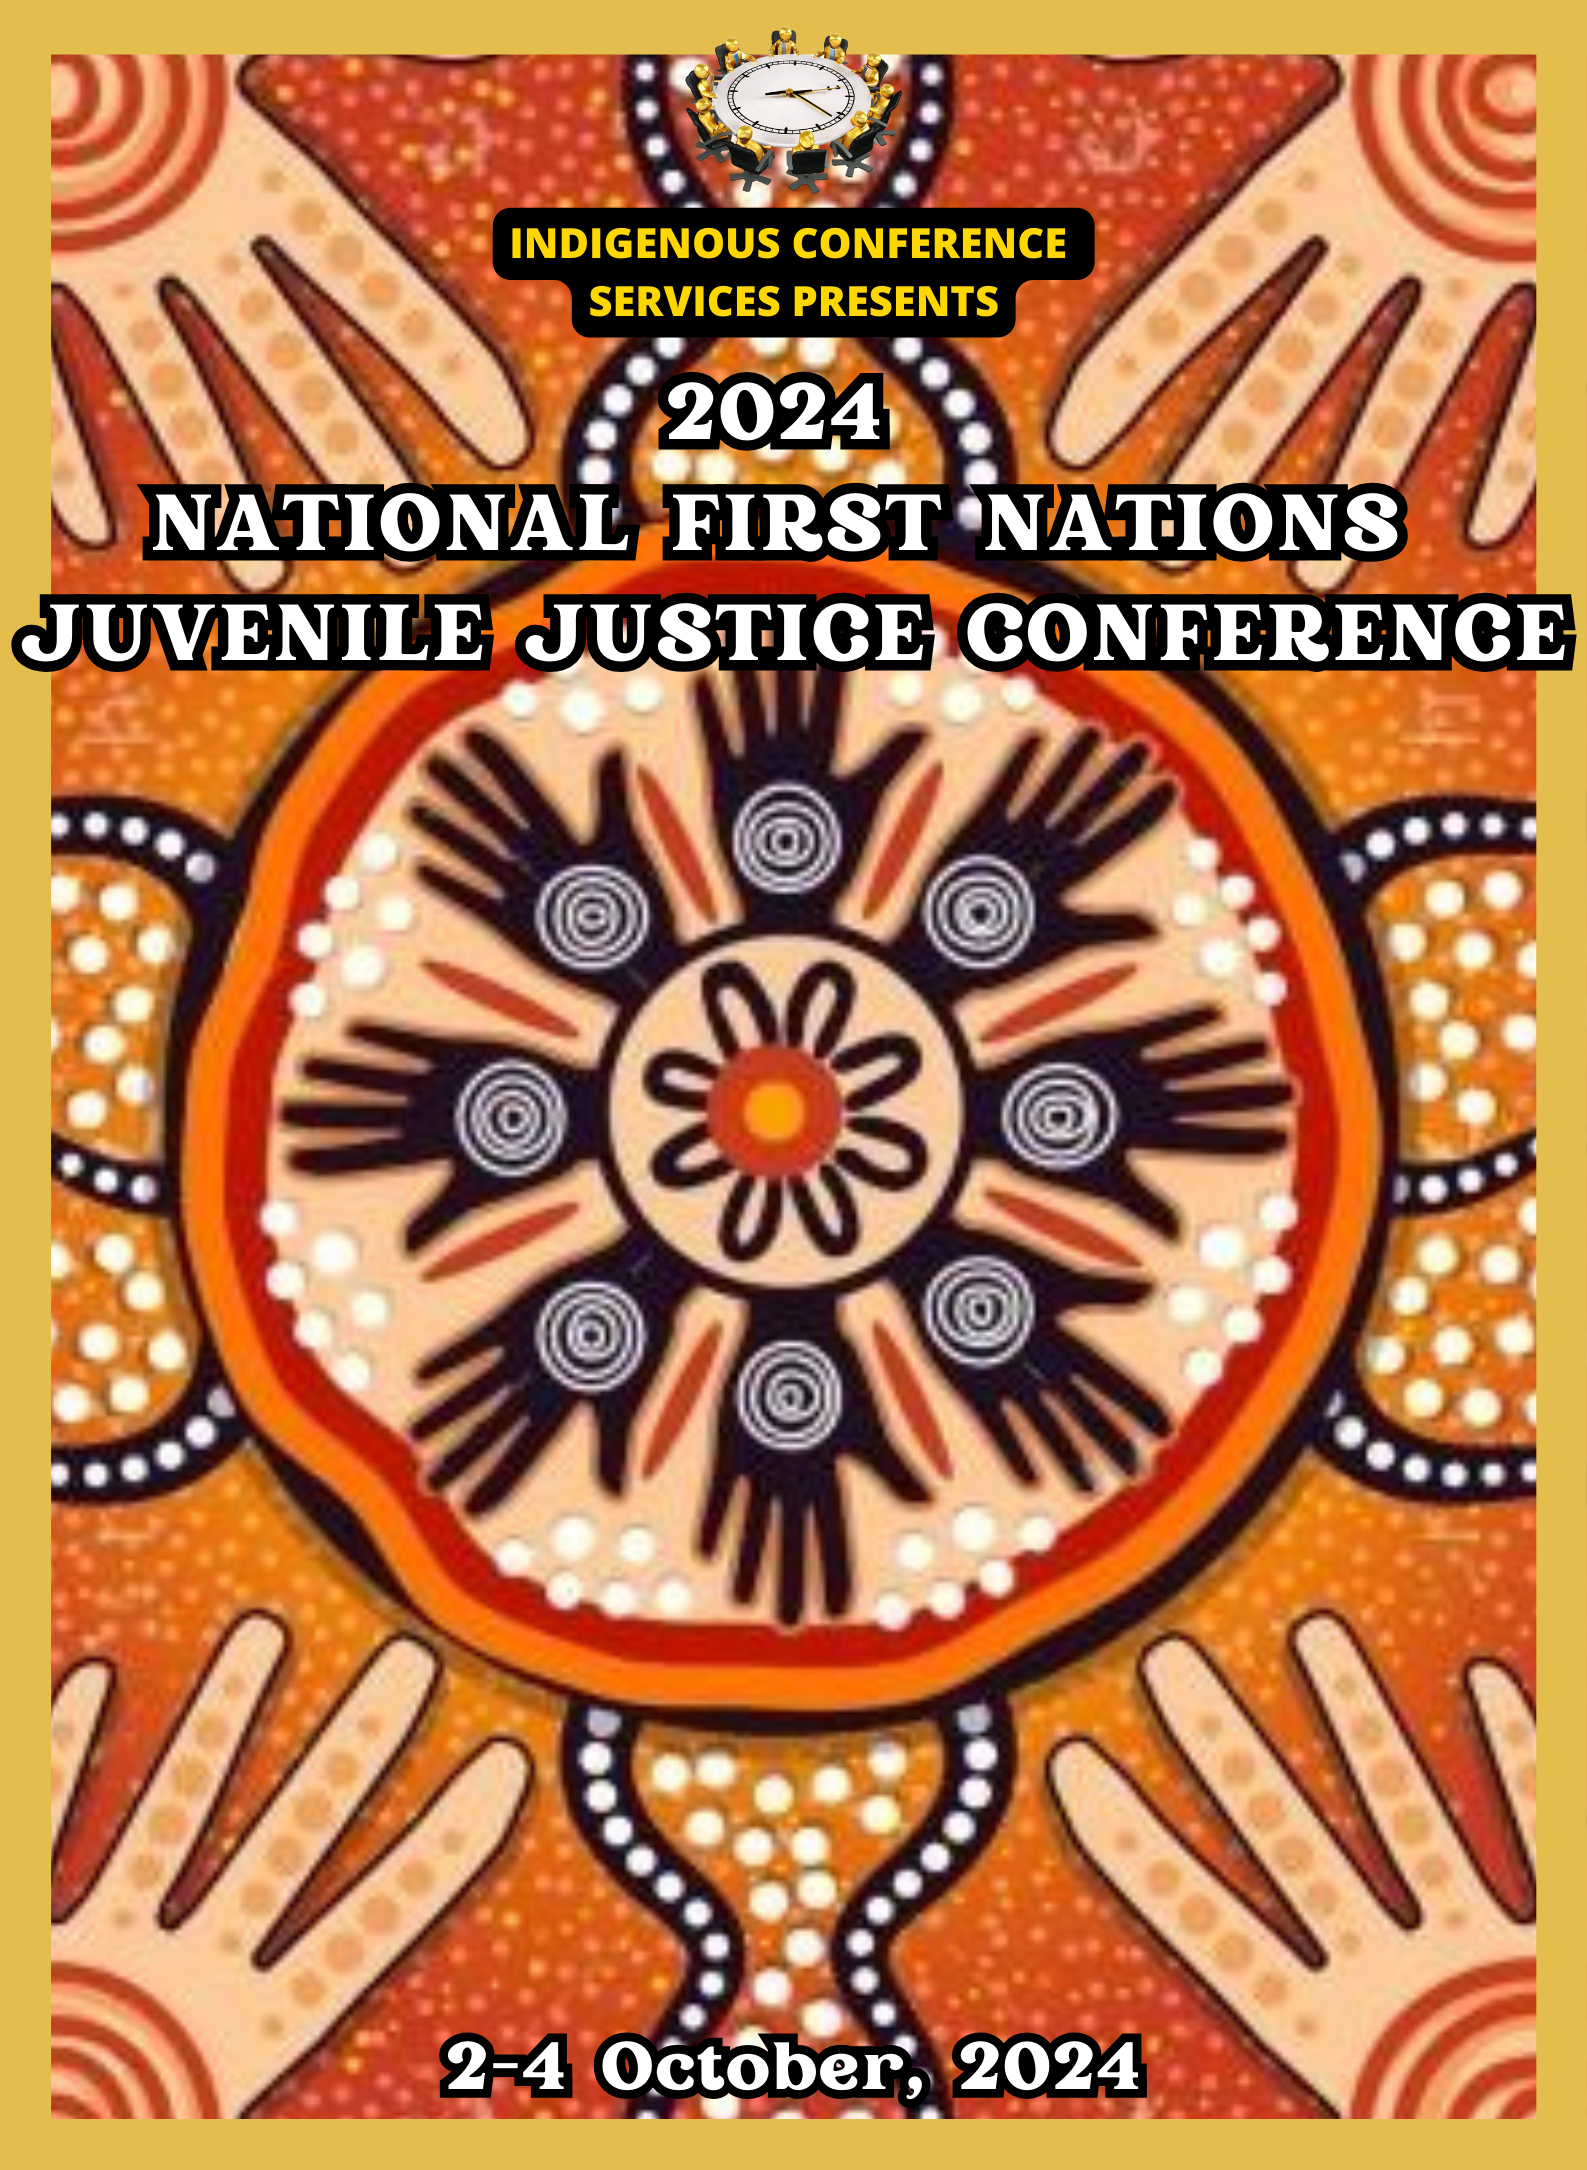 2024 First Nations National Juvenile Justice Conference